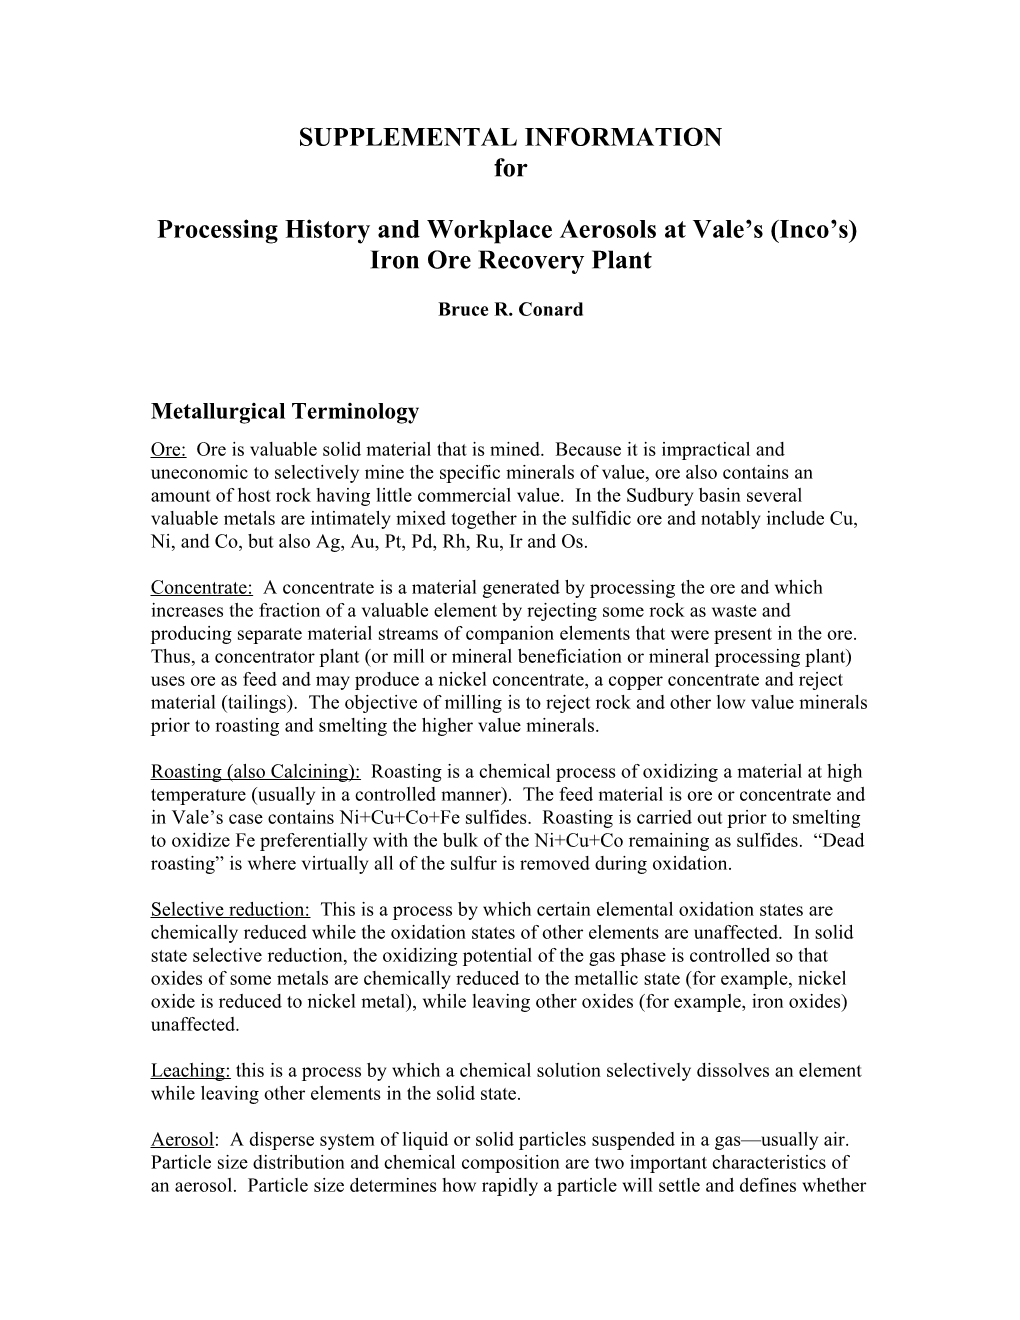 Processing History and Workplace Aerosols at Vale S (Inco S)